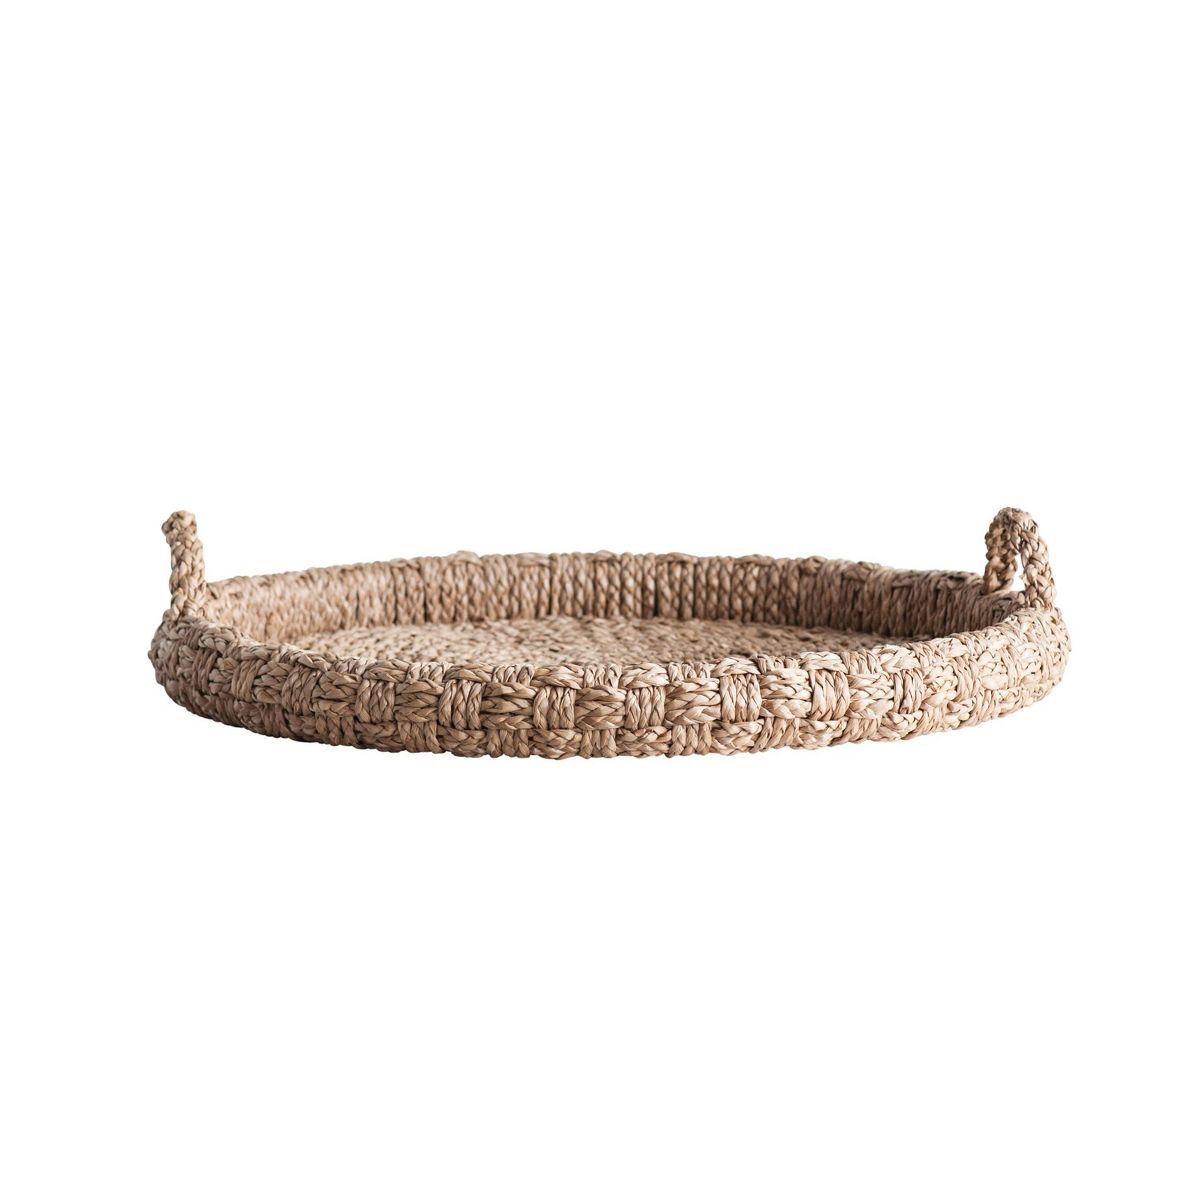 29" x 5" Round Braided Bankuan Tray with Handles Natural - Storied Home | Target